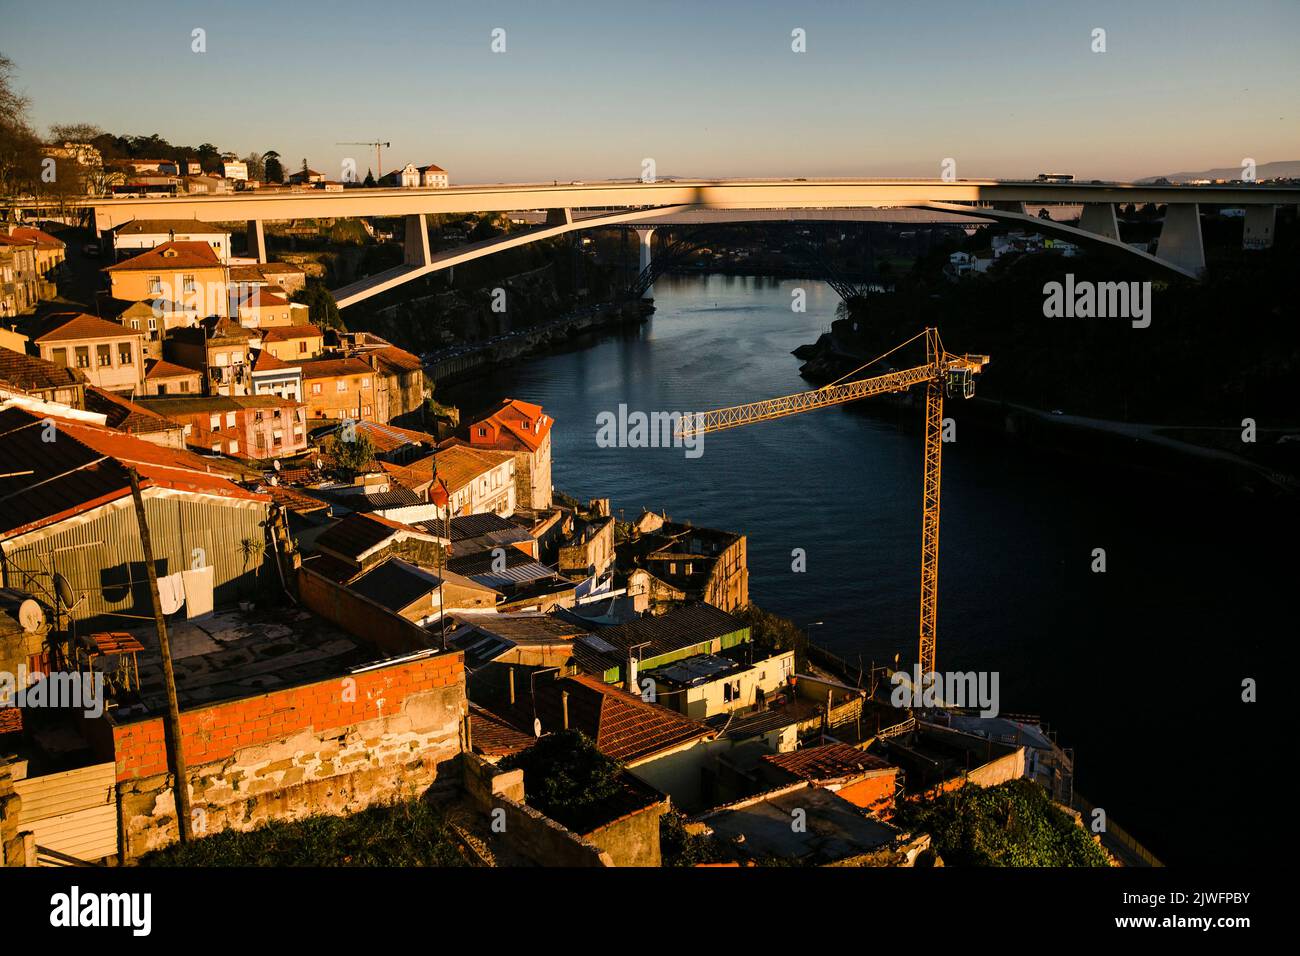 View of the Douro River in the old district of Porto, Portugal. Stock Photo